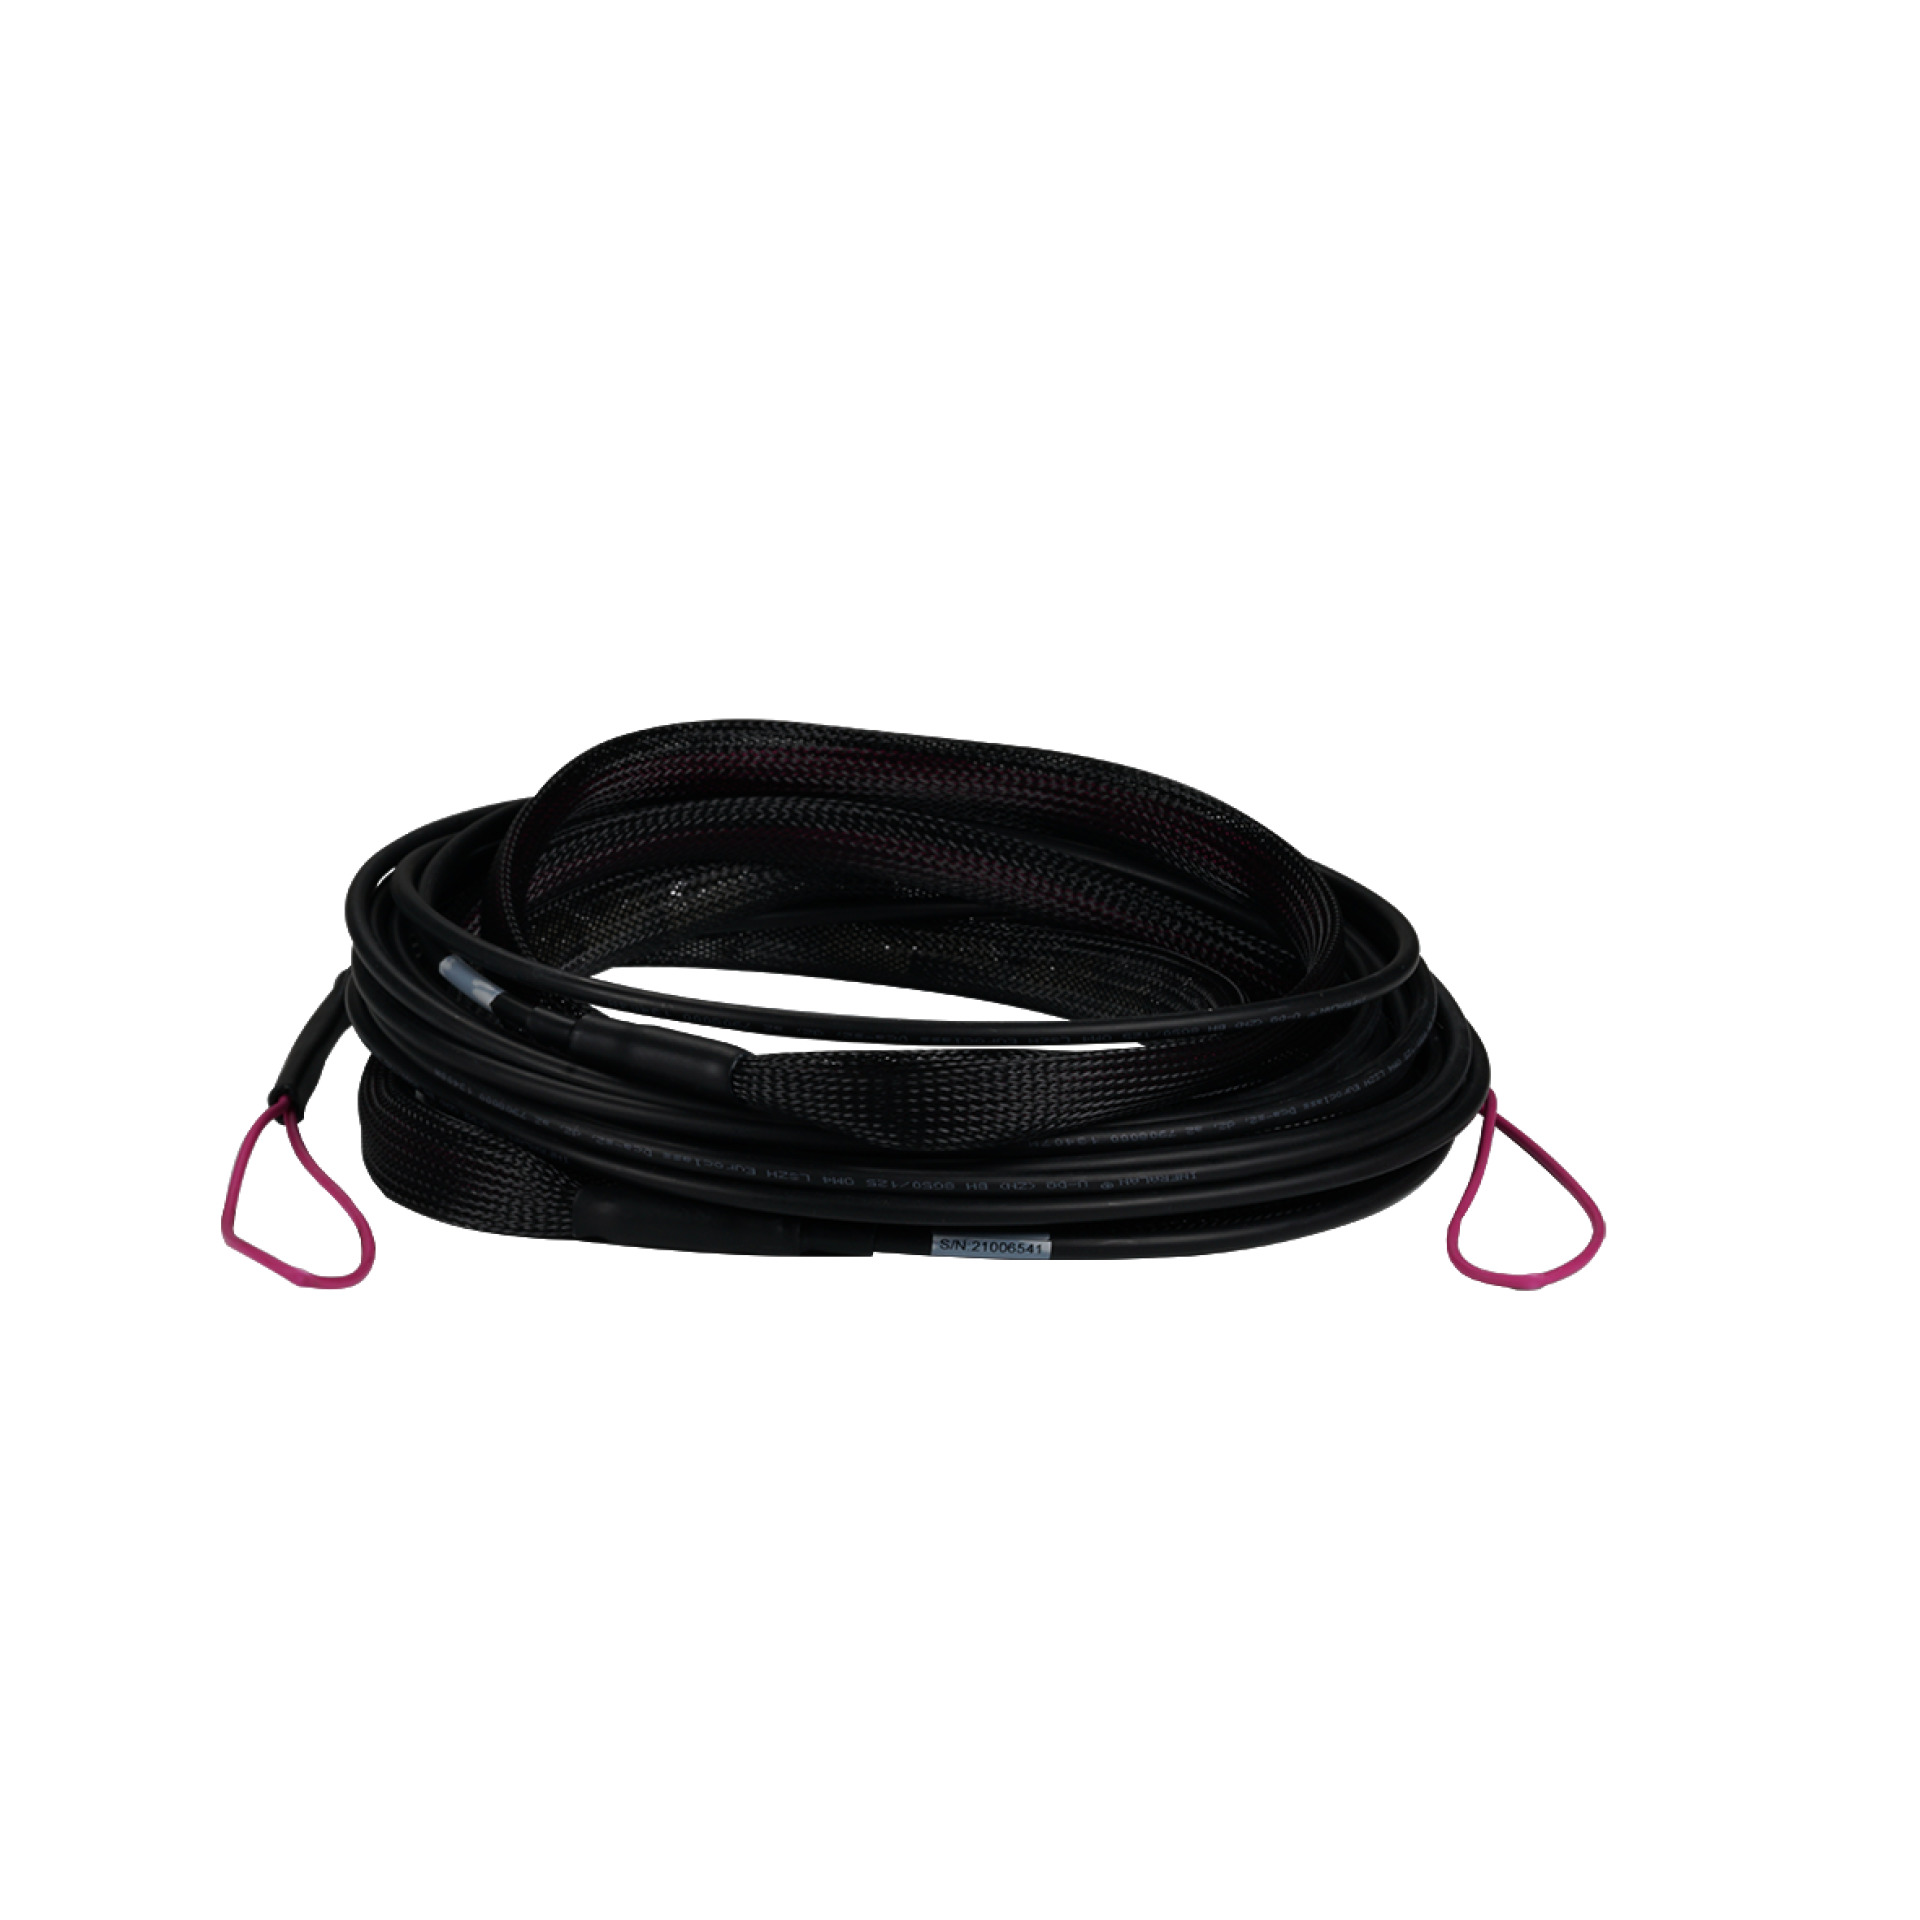 Trunk cable U-DQ(ZN)BH 4G 50/125, SC/SC OM4 120m